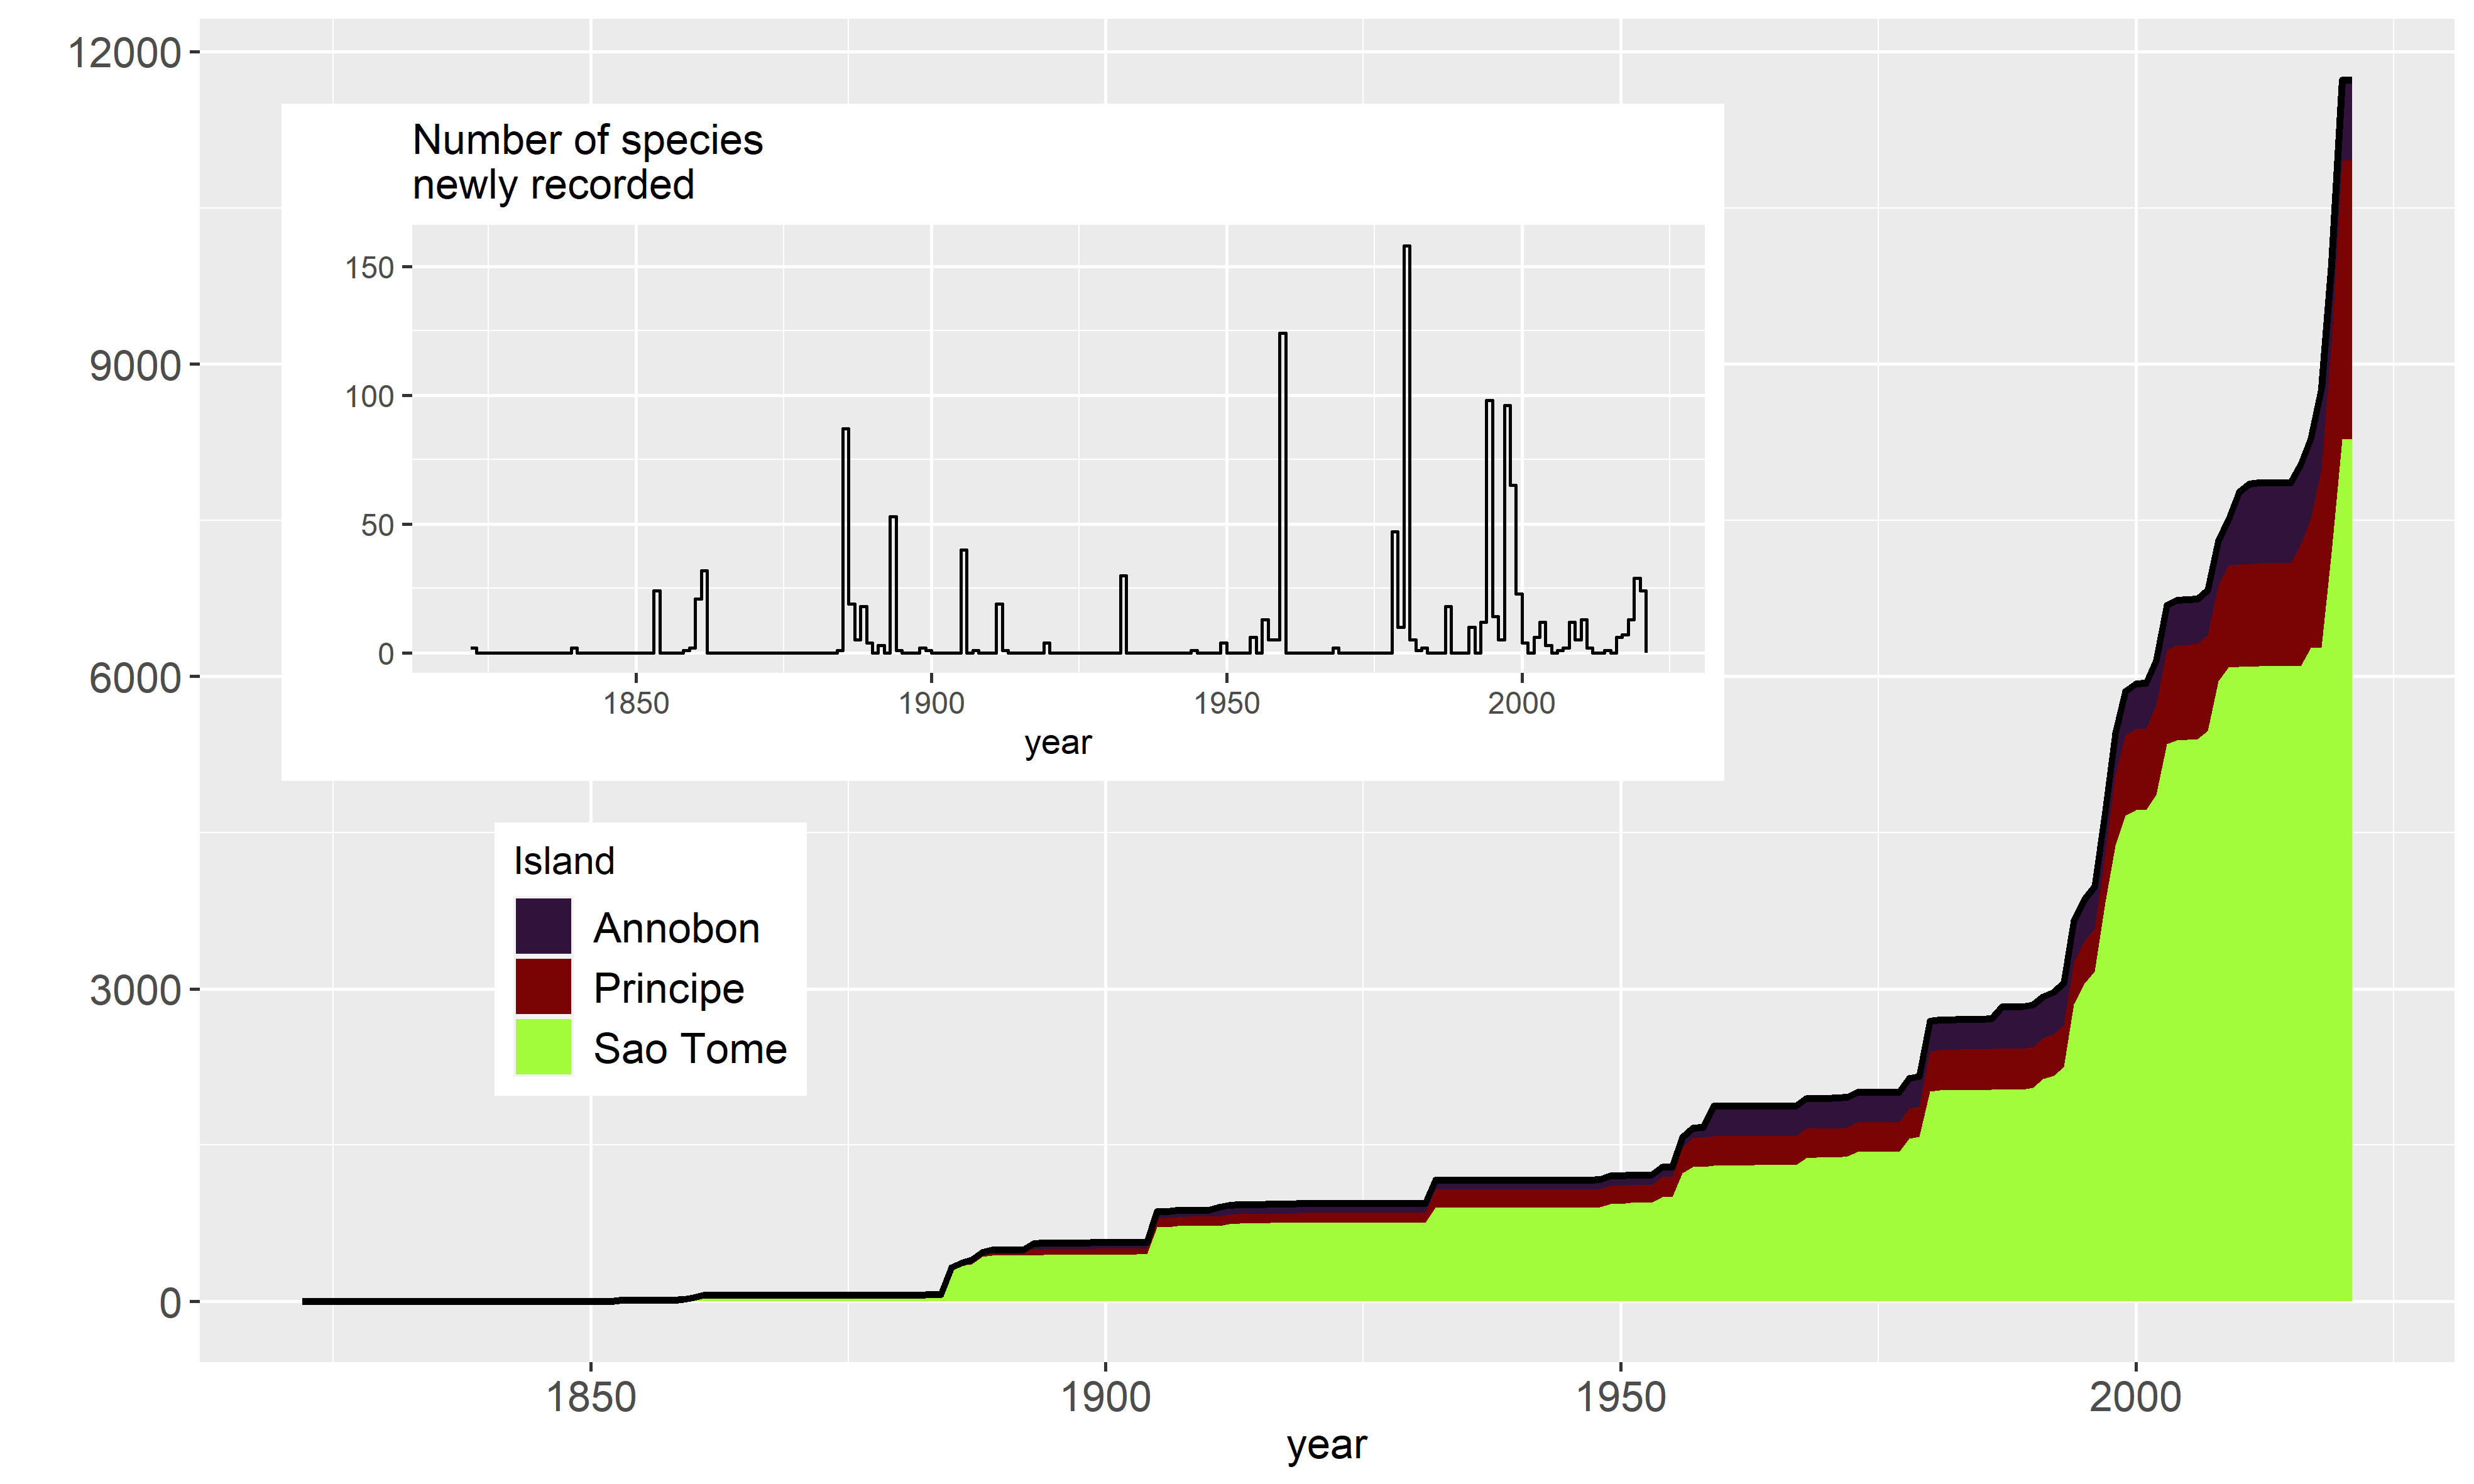 Increase in number of collections (for São Tomé, Príncipe and Annobon separately) and species since 1850, highlighting the inventories conducted during the project